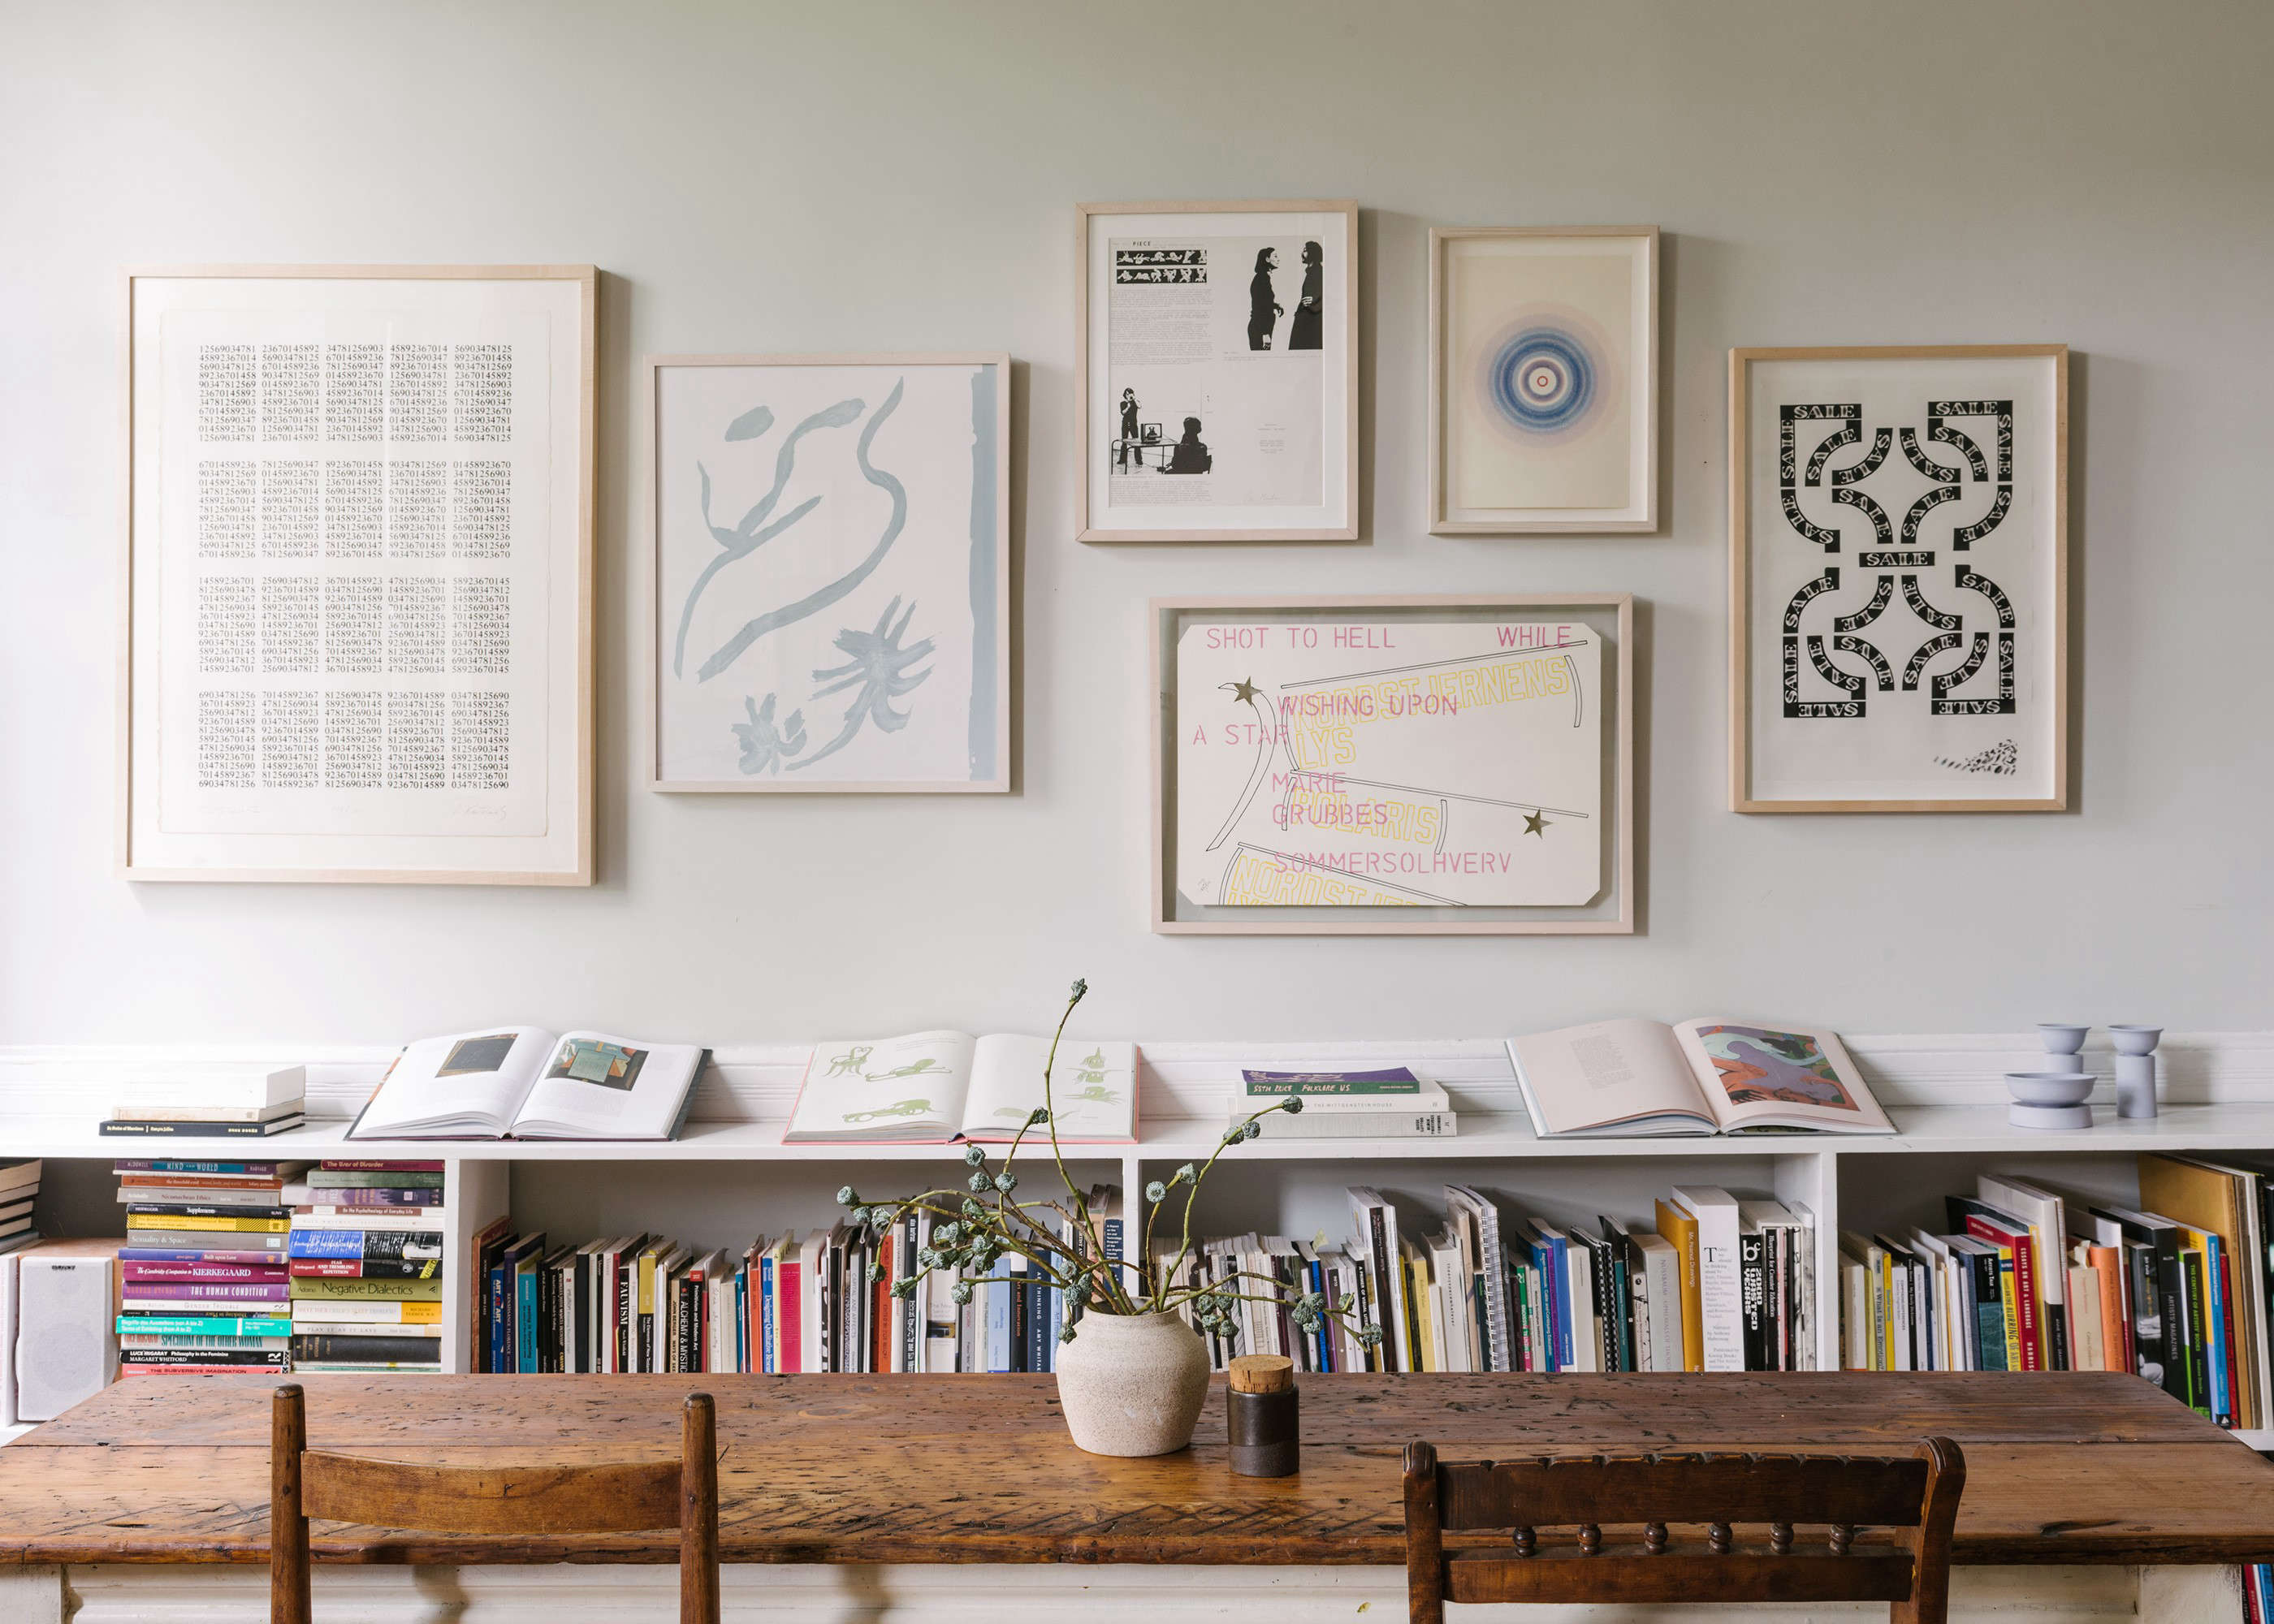 Expert Advice 10 Tips For Displaying Art At Home From A Museum Curator Remodelista